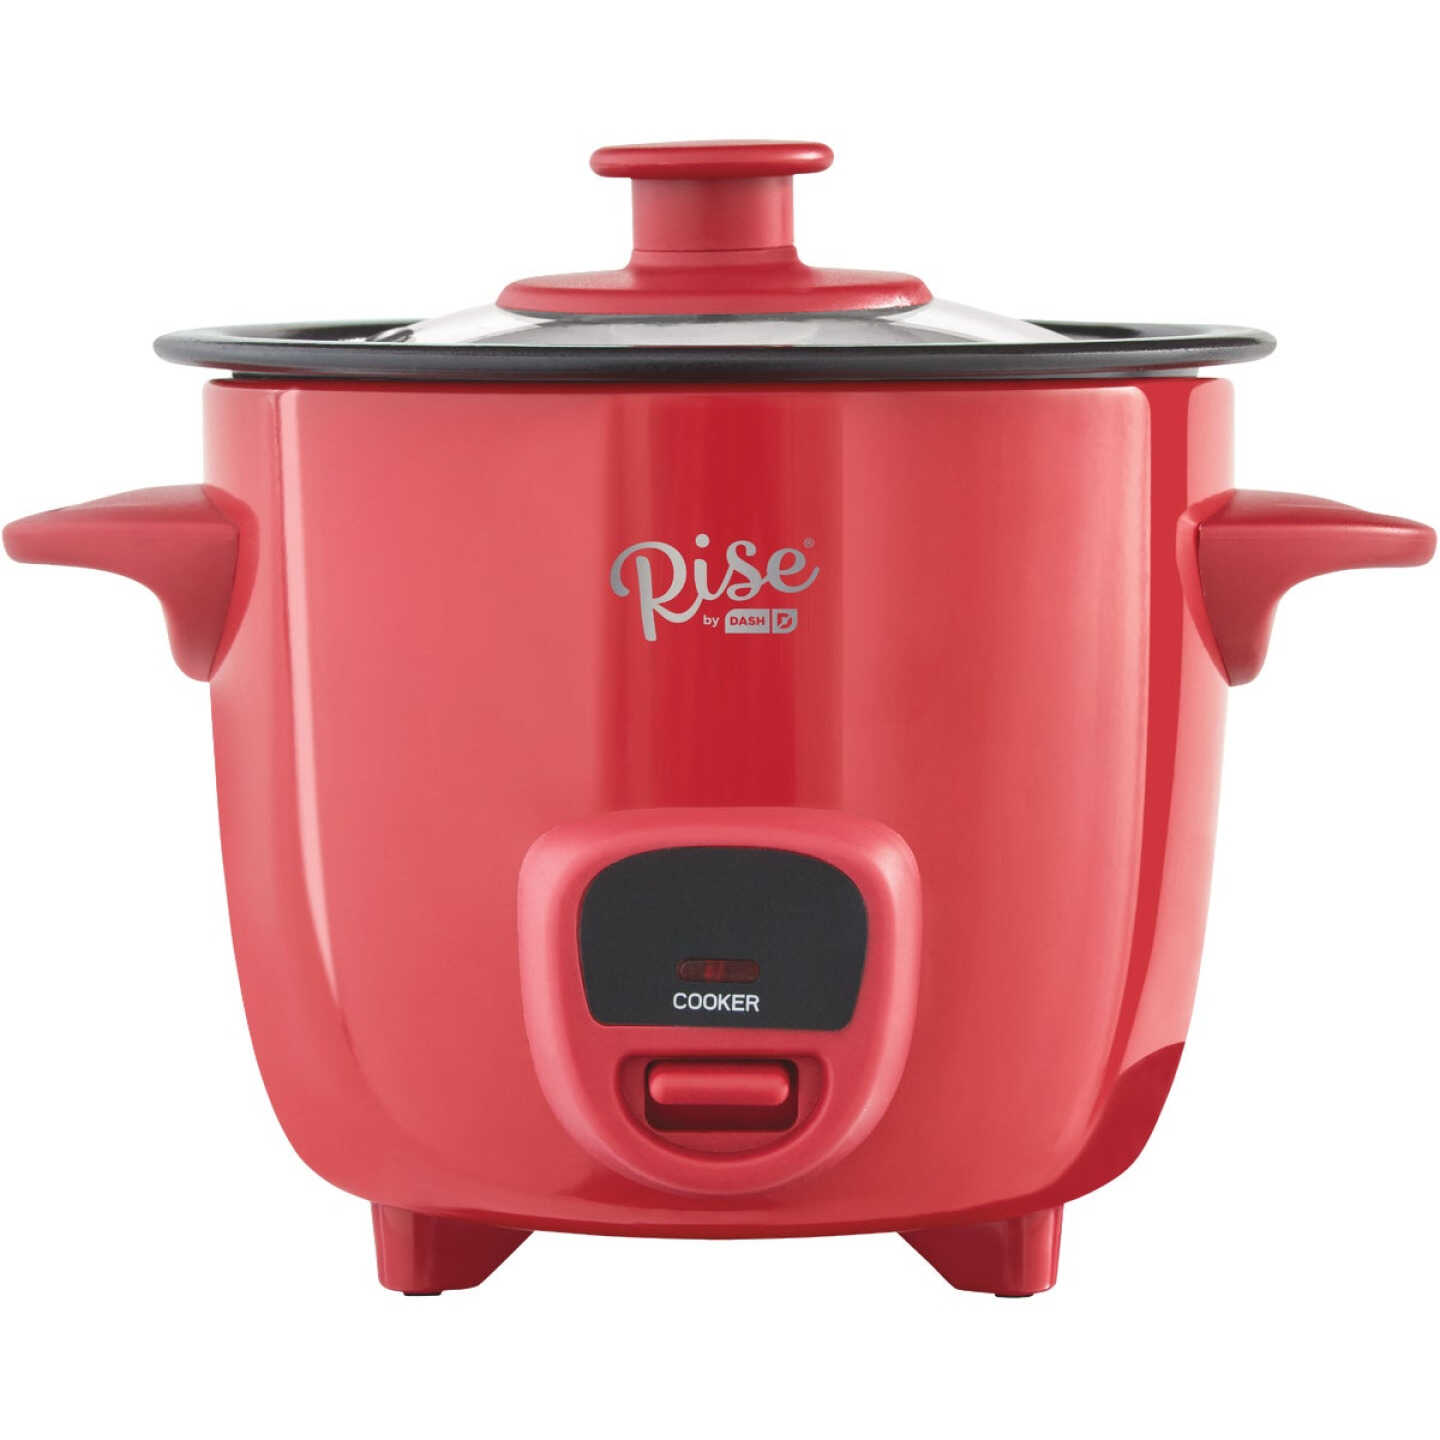 Dash Mini Rice Cooker with Keep Warm 2 Cup Red